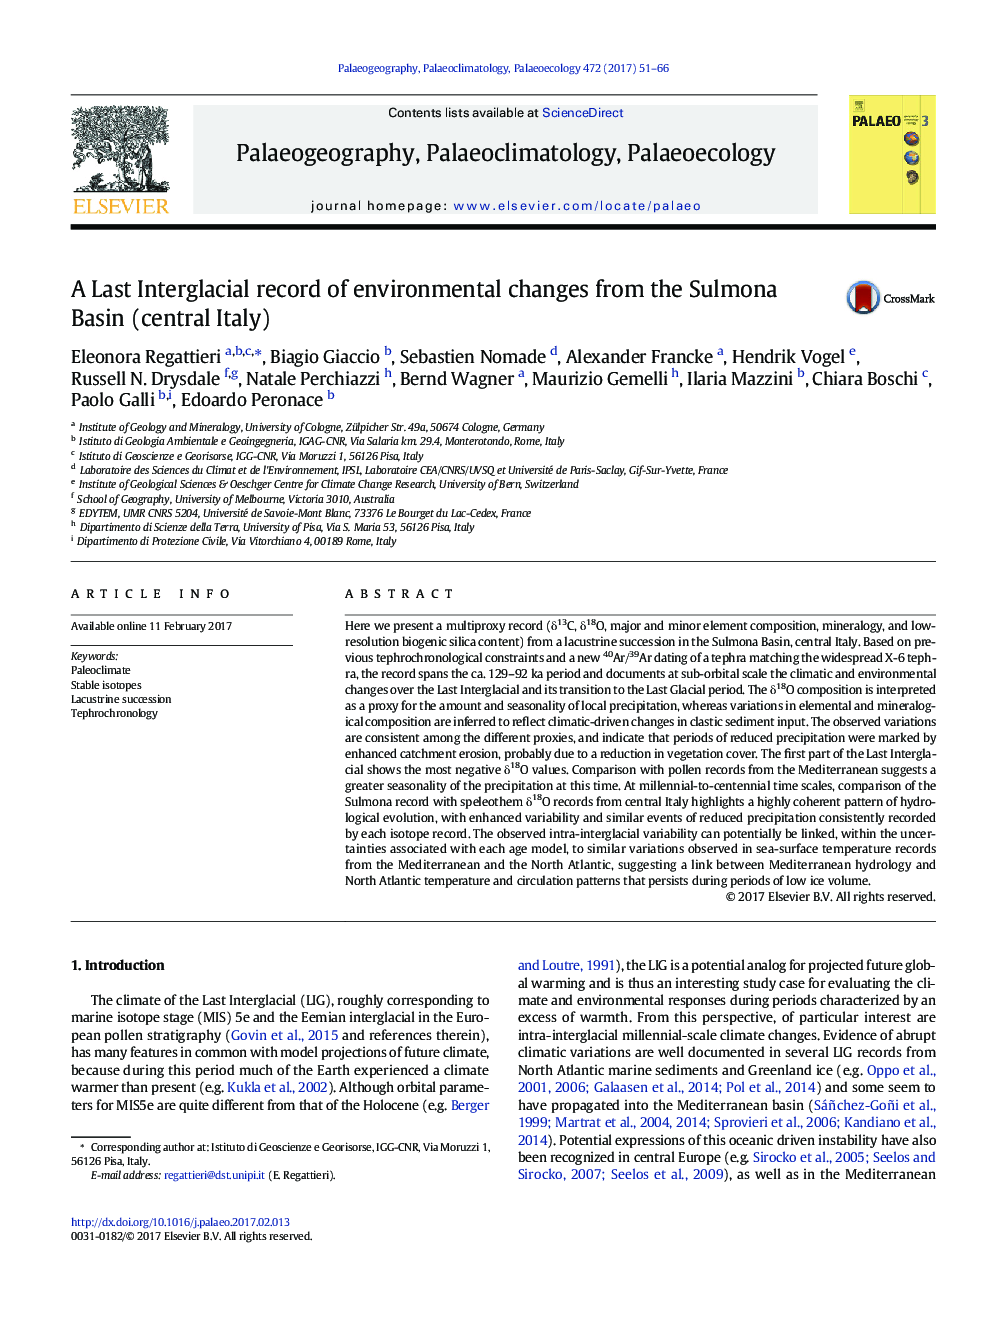 A Last Interglacial record of environmental changes from the Sulmona Basin (central Italy)